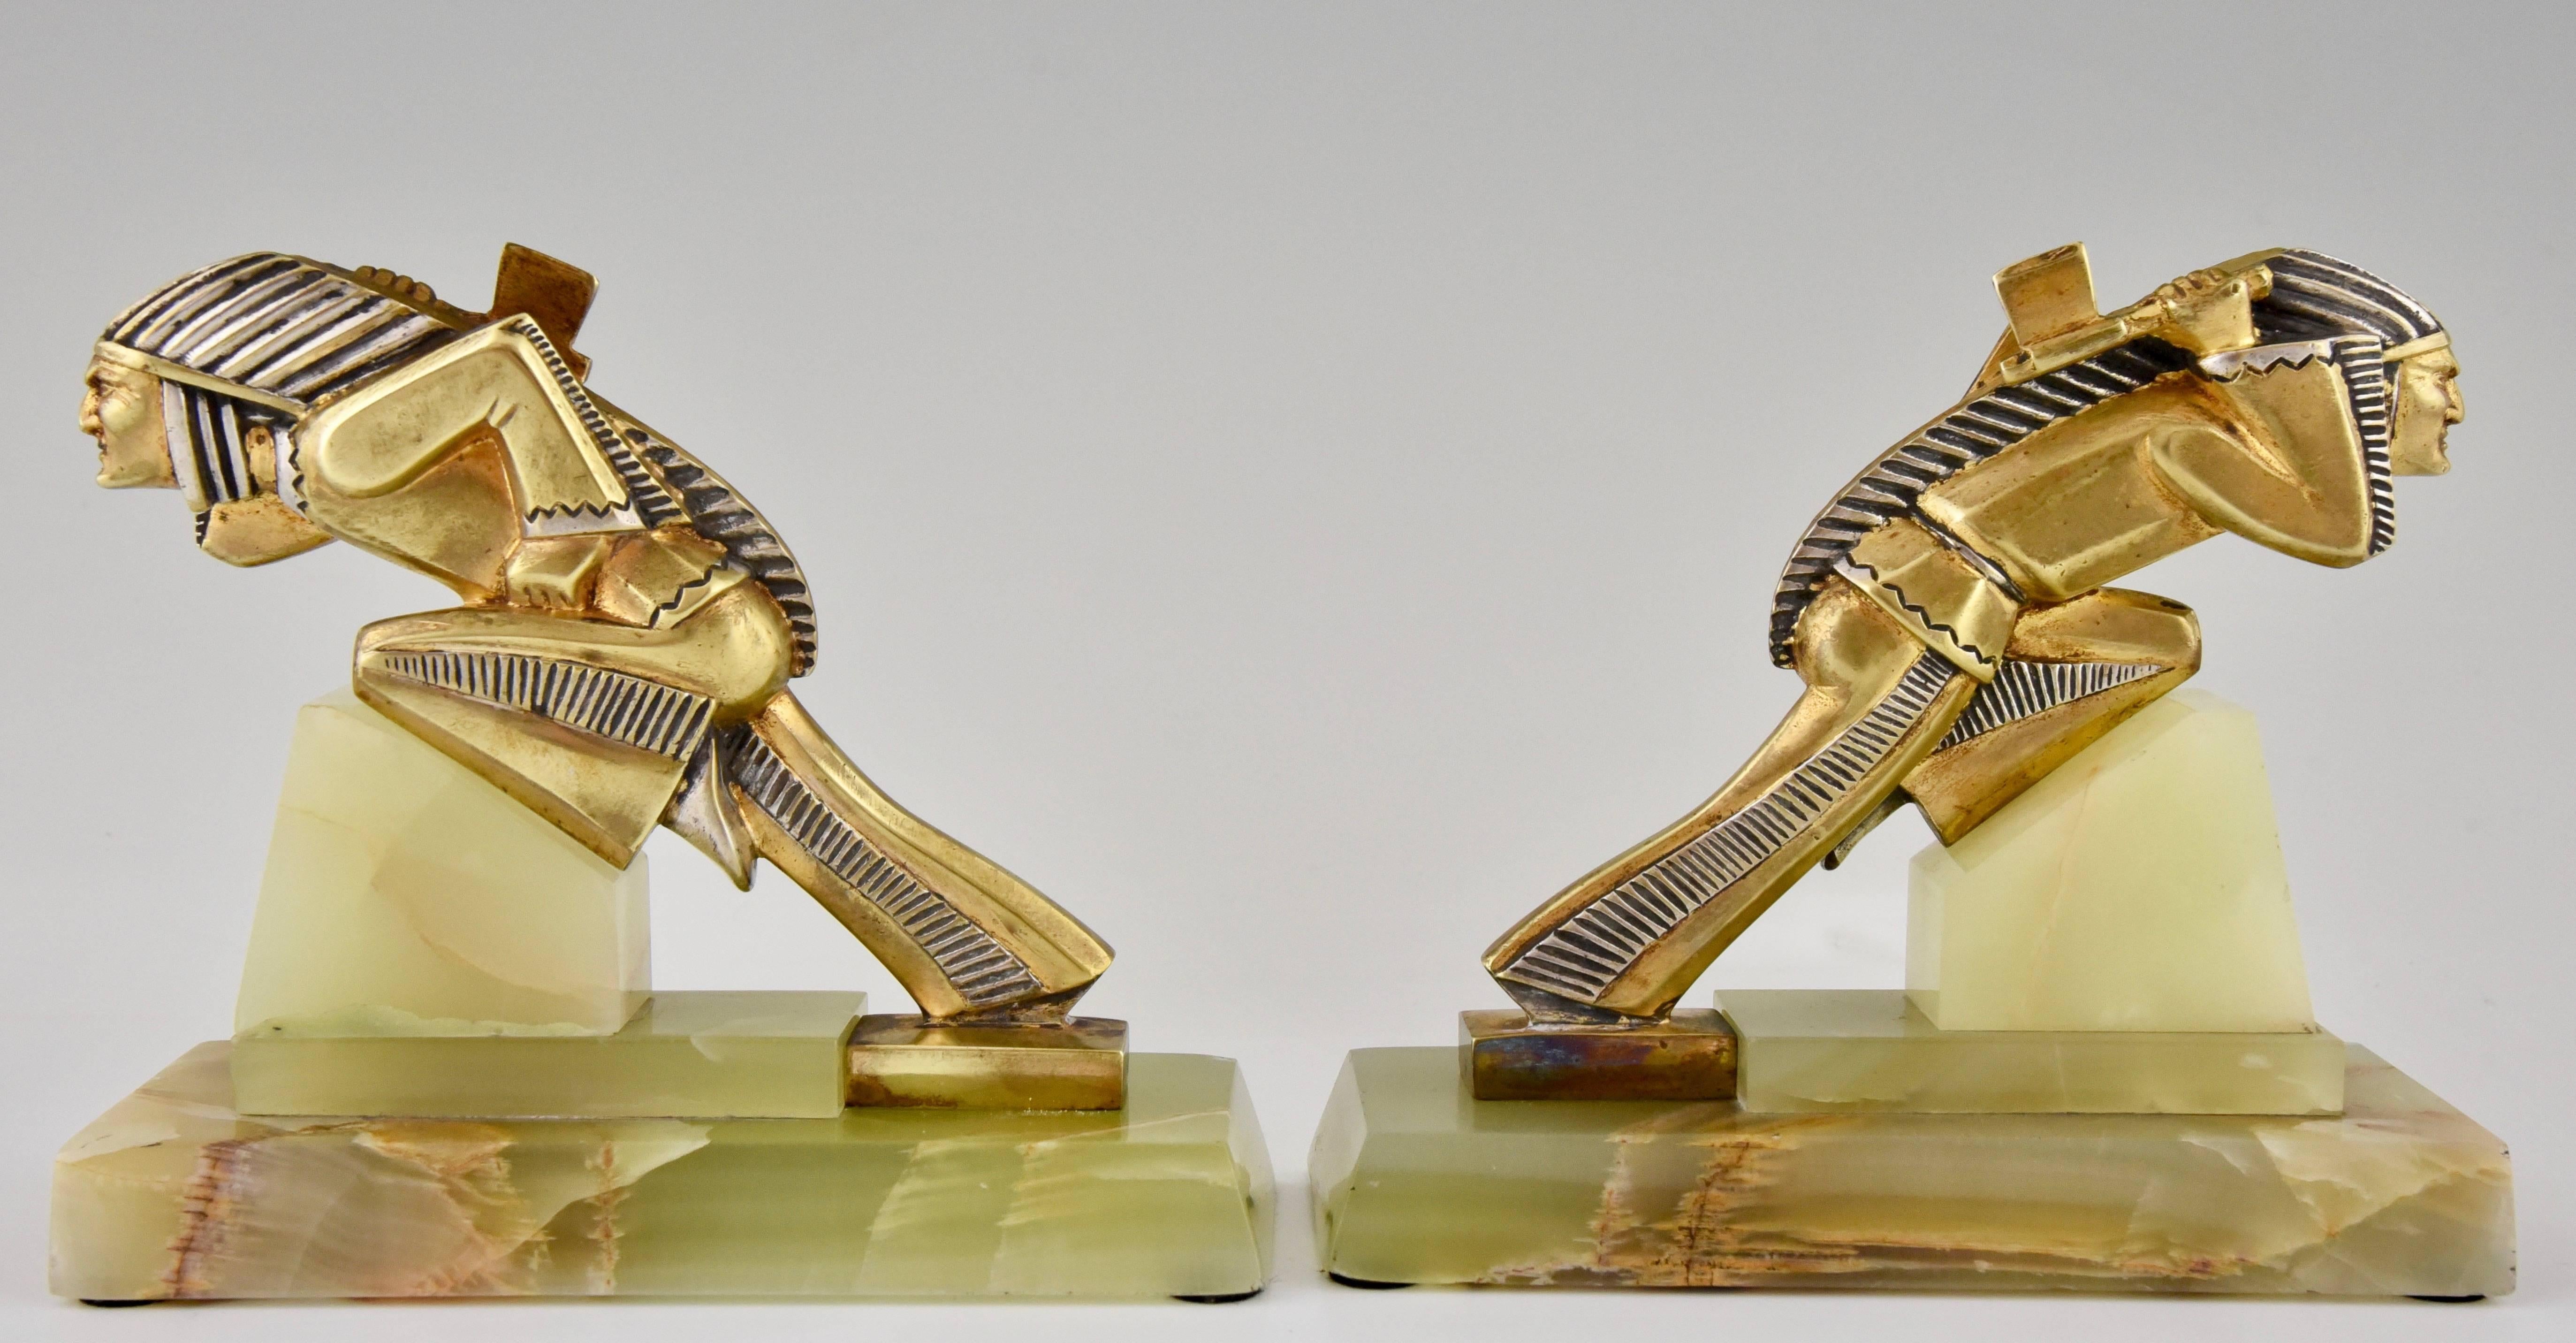 A pair of Indian Art Deco bronze bookends.
Artist/ Maker: Gibert
Signature/ Marks: Unsigned
Style: Art Deco
Date: 1930
Material: Gilt and silvered bronze.?Onyx base.
Origin: France
Size: H. 13.5 cm x L. 15.3 cm. x W. 6.7 cm. ? 
H. 5.3 inch x